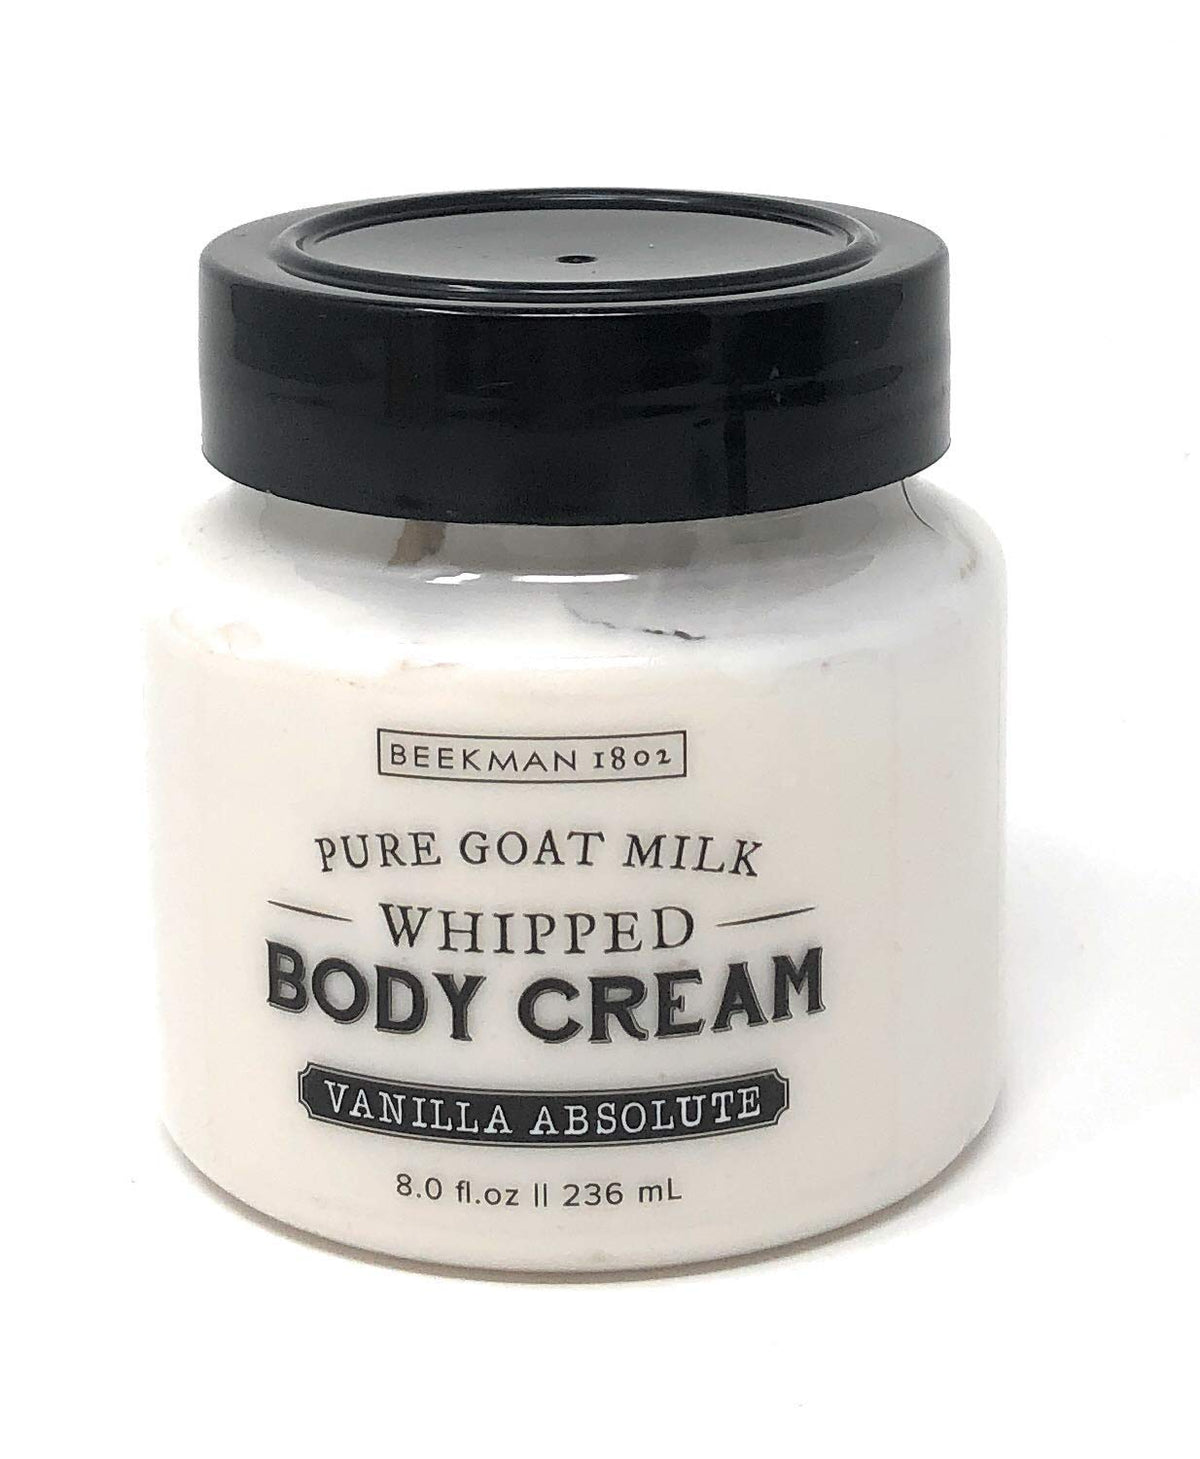 Beekman 1802 Vanilla Absolute Pure Goat Milk Whipped Body Cream - 8.0 fl oz. - The Finished Room